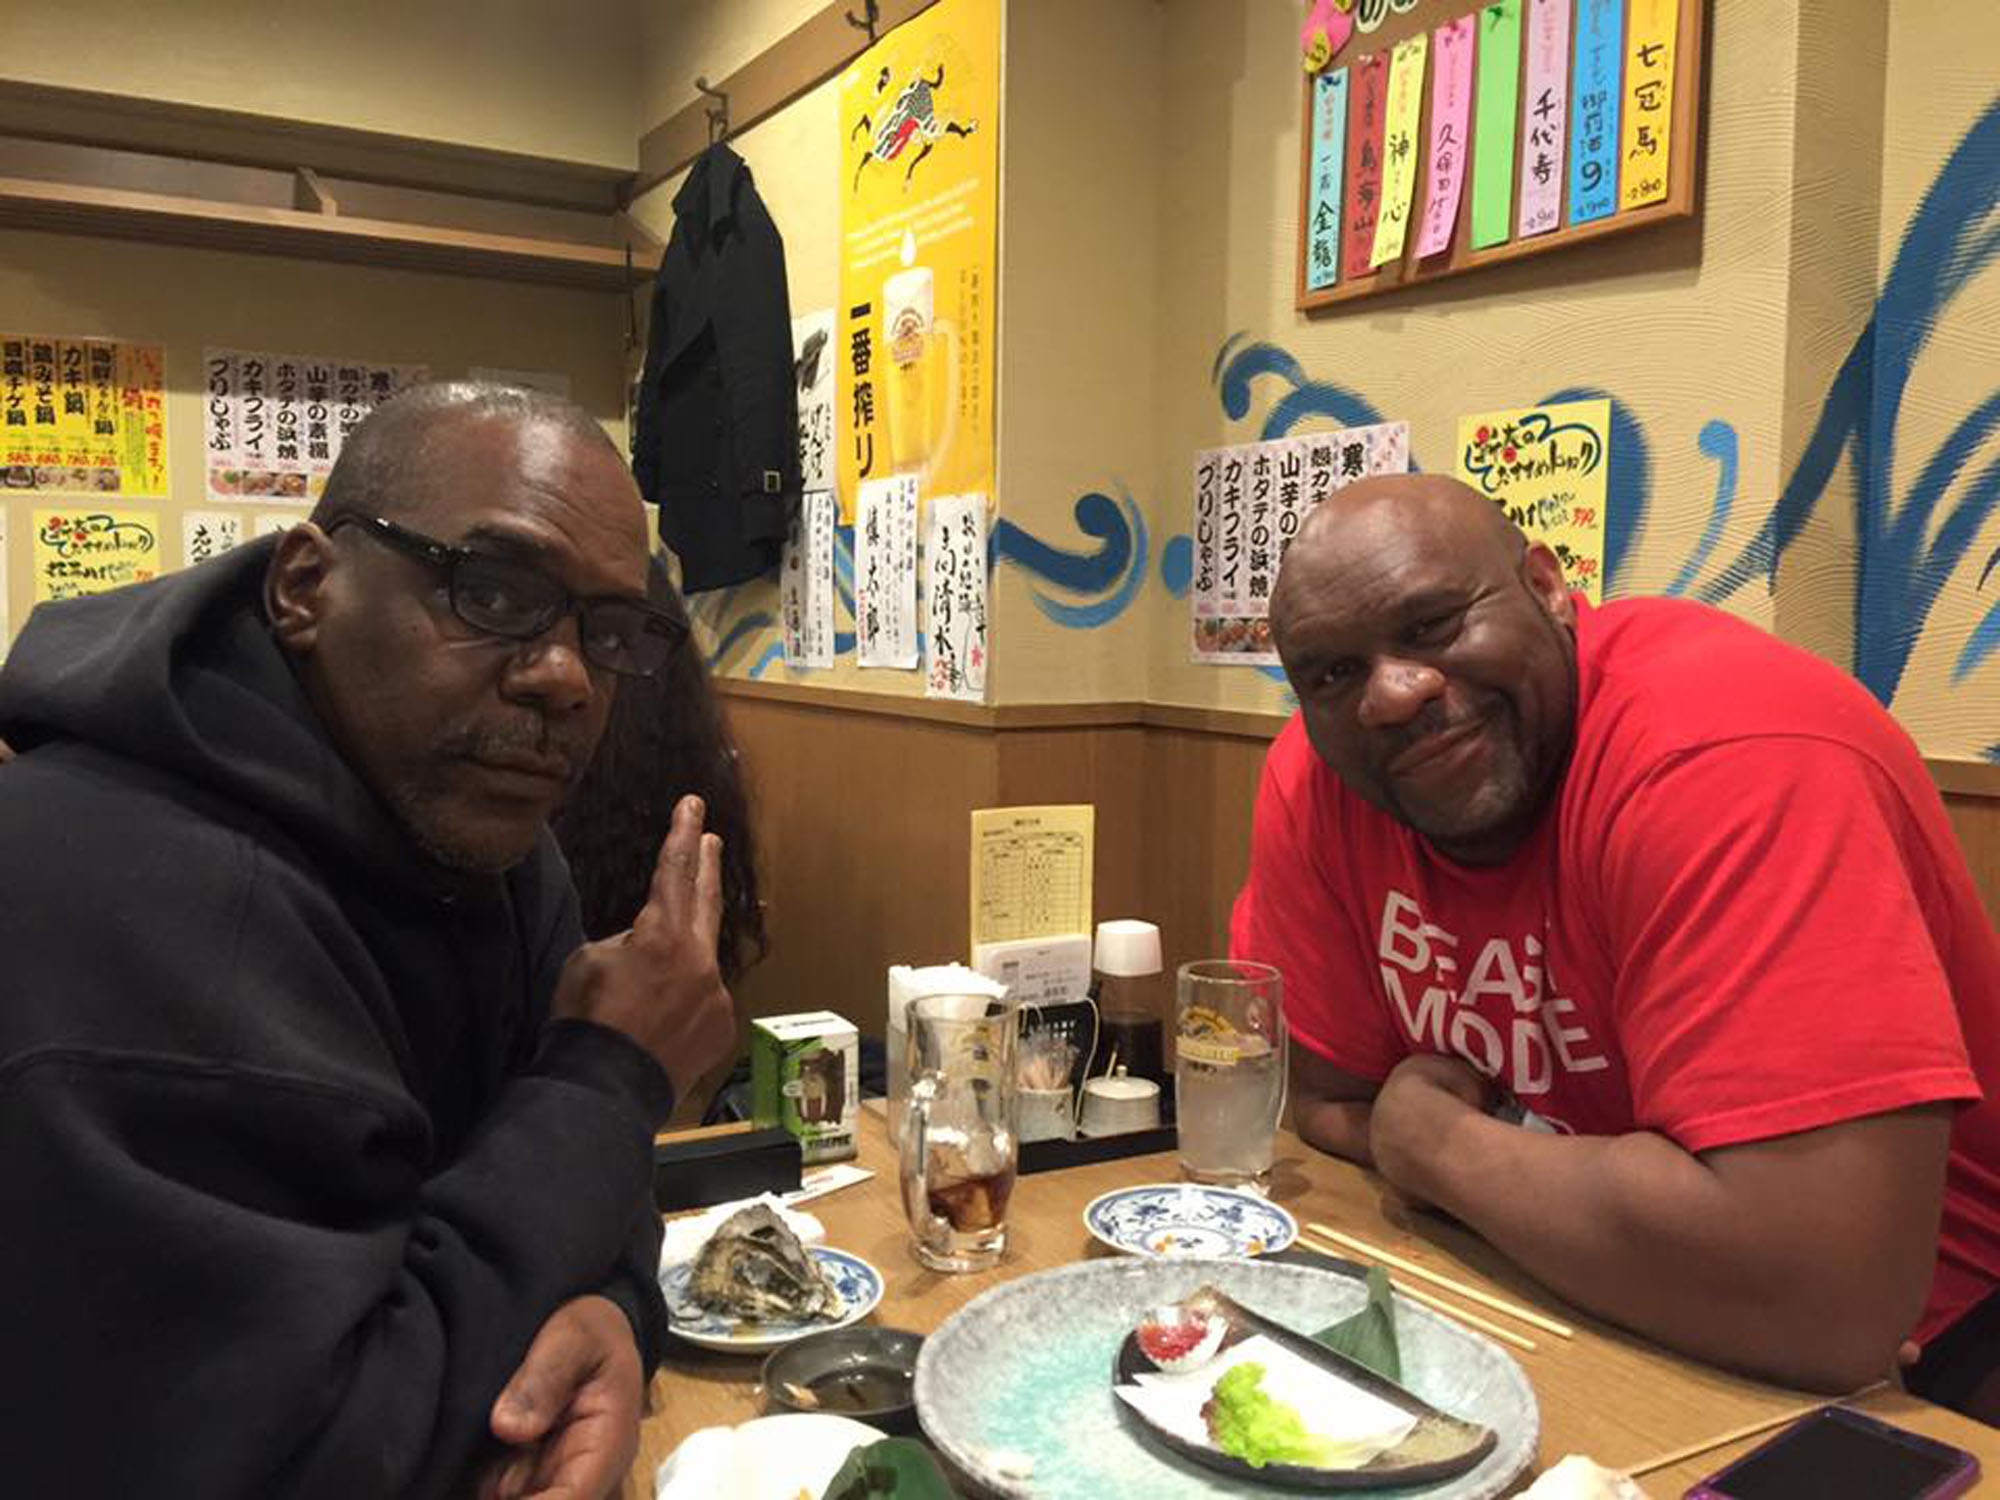 Out on the town: Writer Baye McNeil hits up an izakaya (Japanese pub) with kickboxer and media personality Bob Sapp. The pair discussed Sapp's 'Beast' persona, which has recently turned up in a series of commercials on YouTube. | PHOTO COURTESY OF BAYE MCNEIL